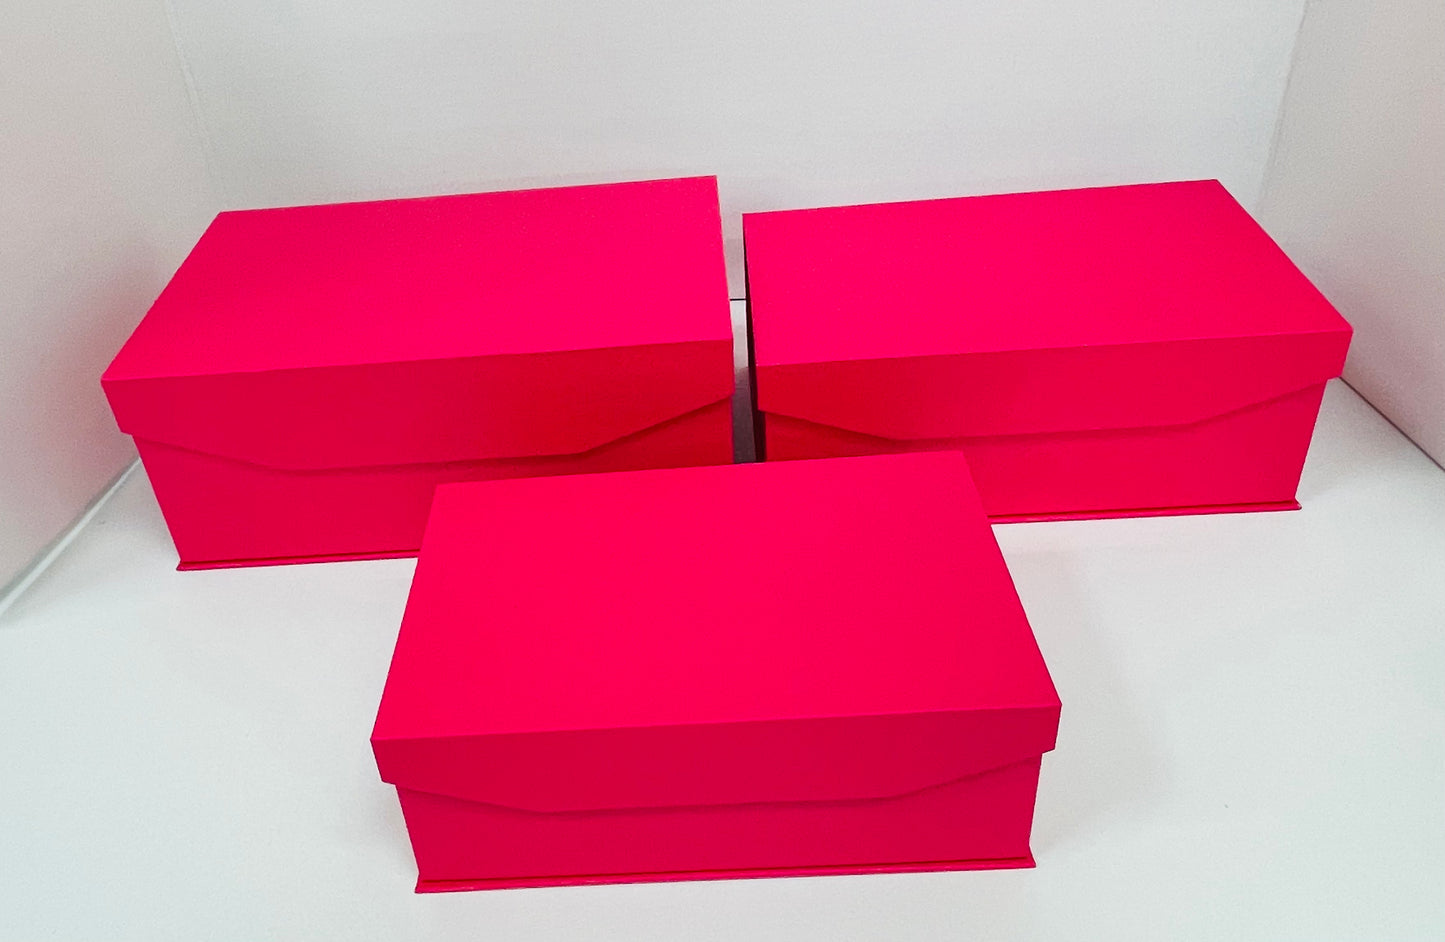 Set of 3 PINK Magnetic Gift Box